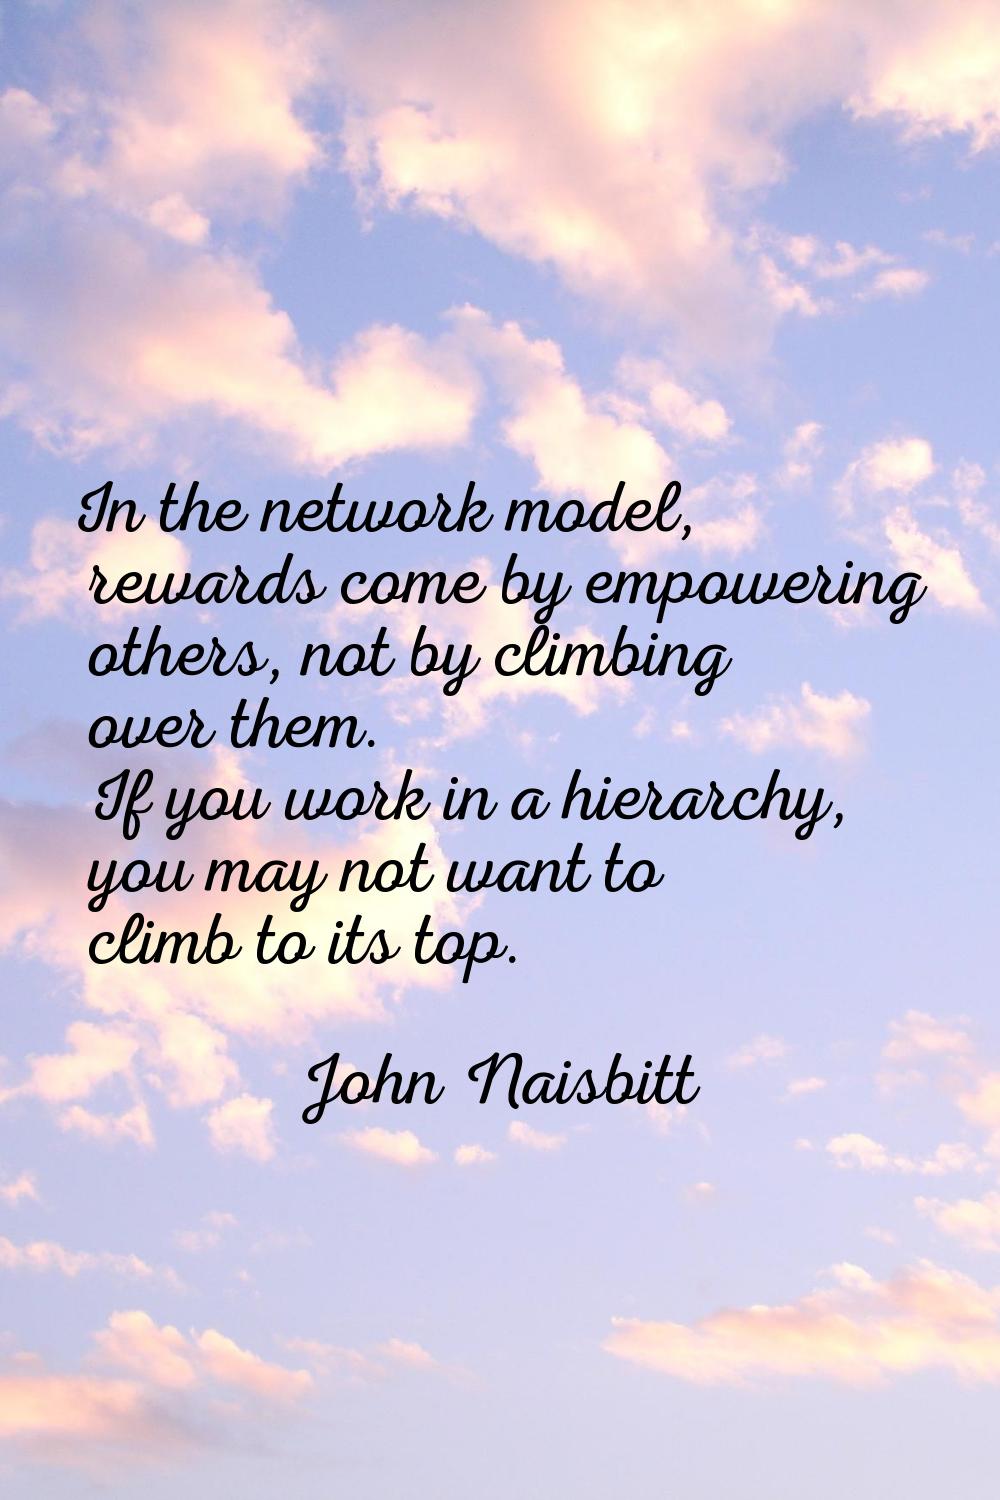 In the network model, rewards come by empowering others, not by climbing over them. If you work in 